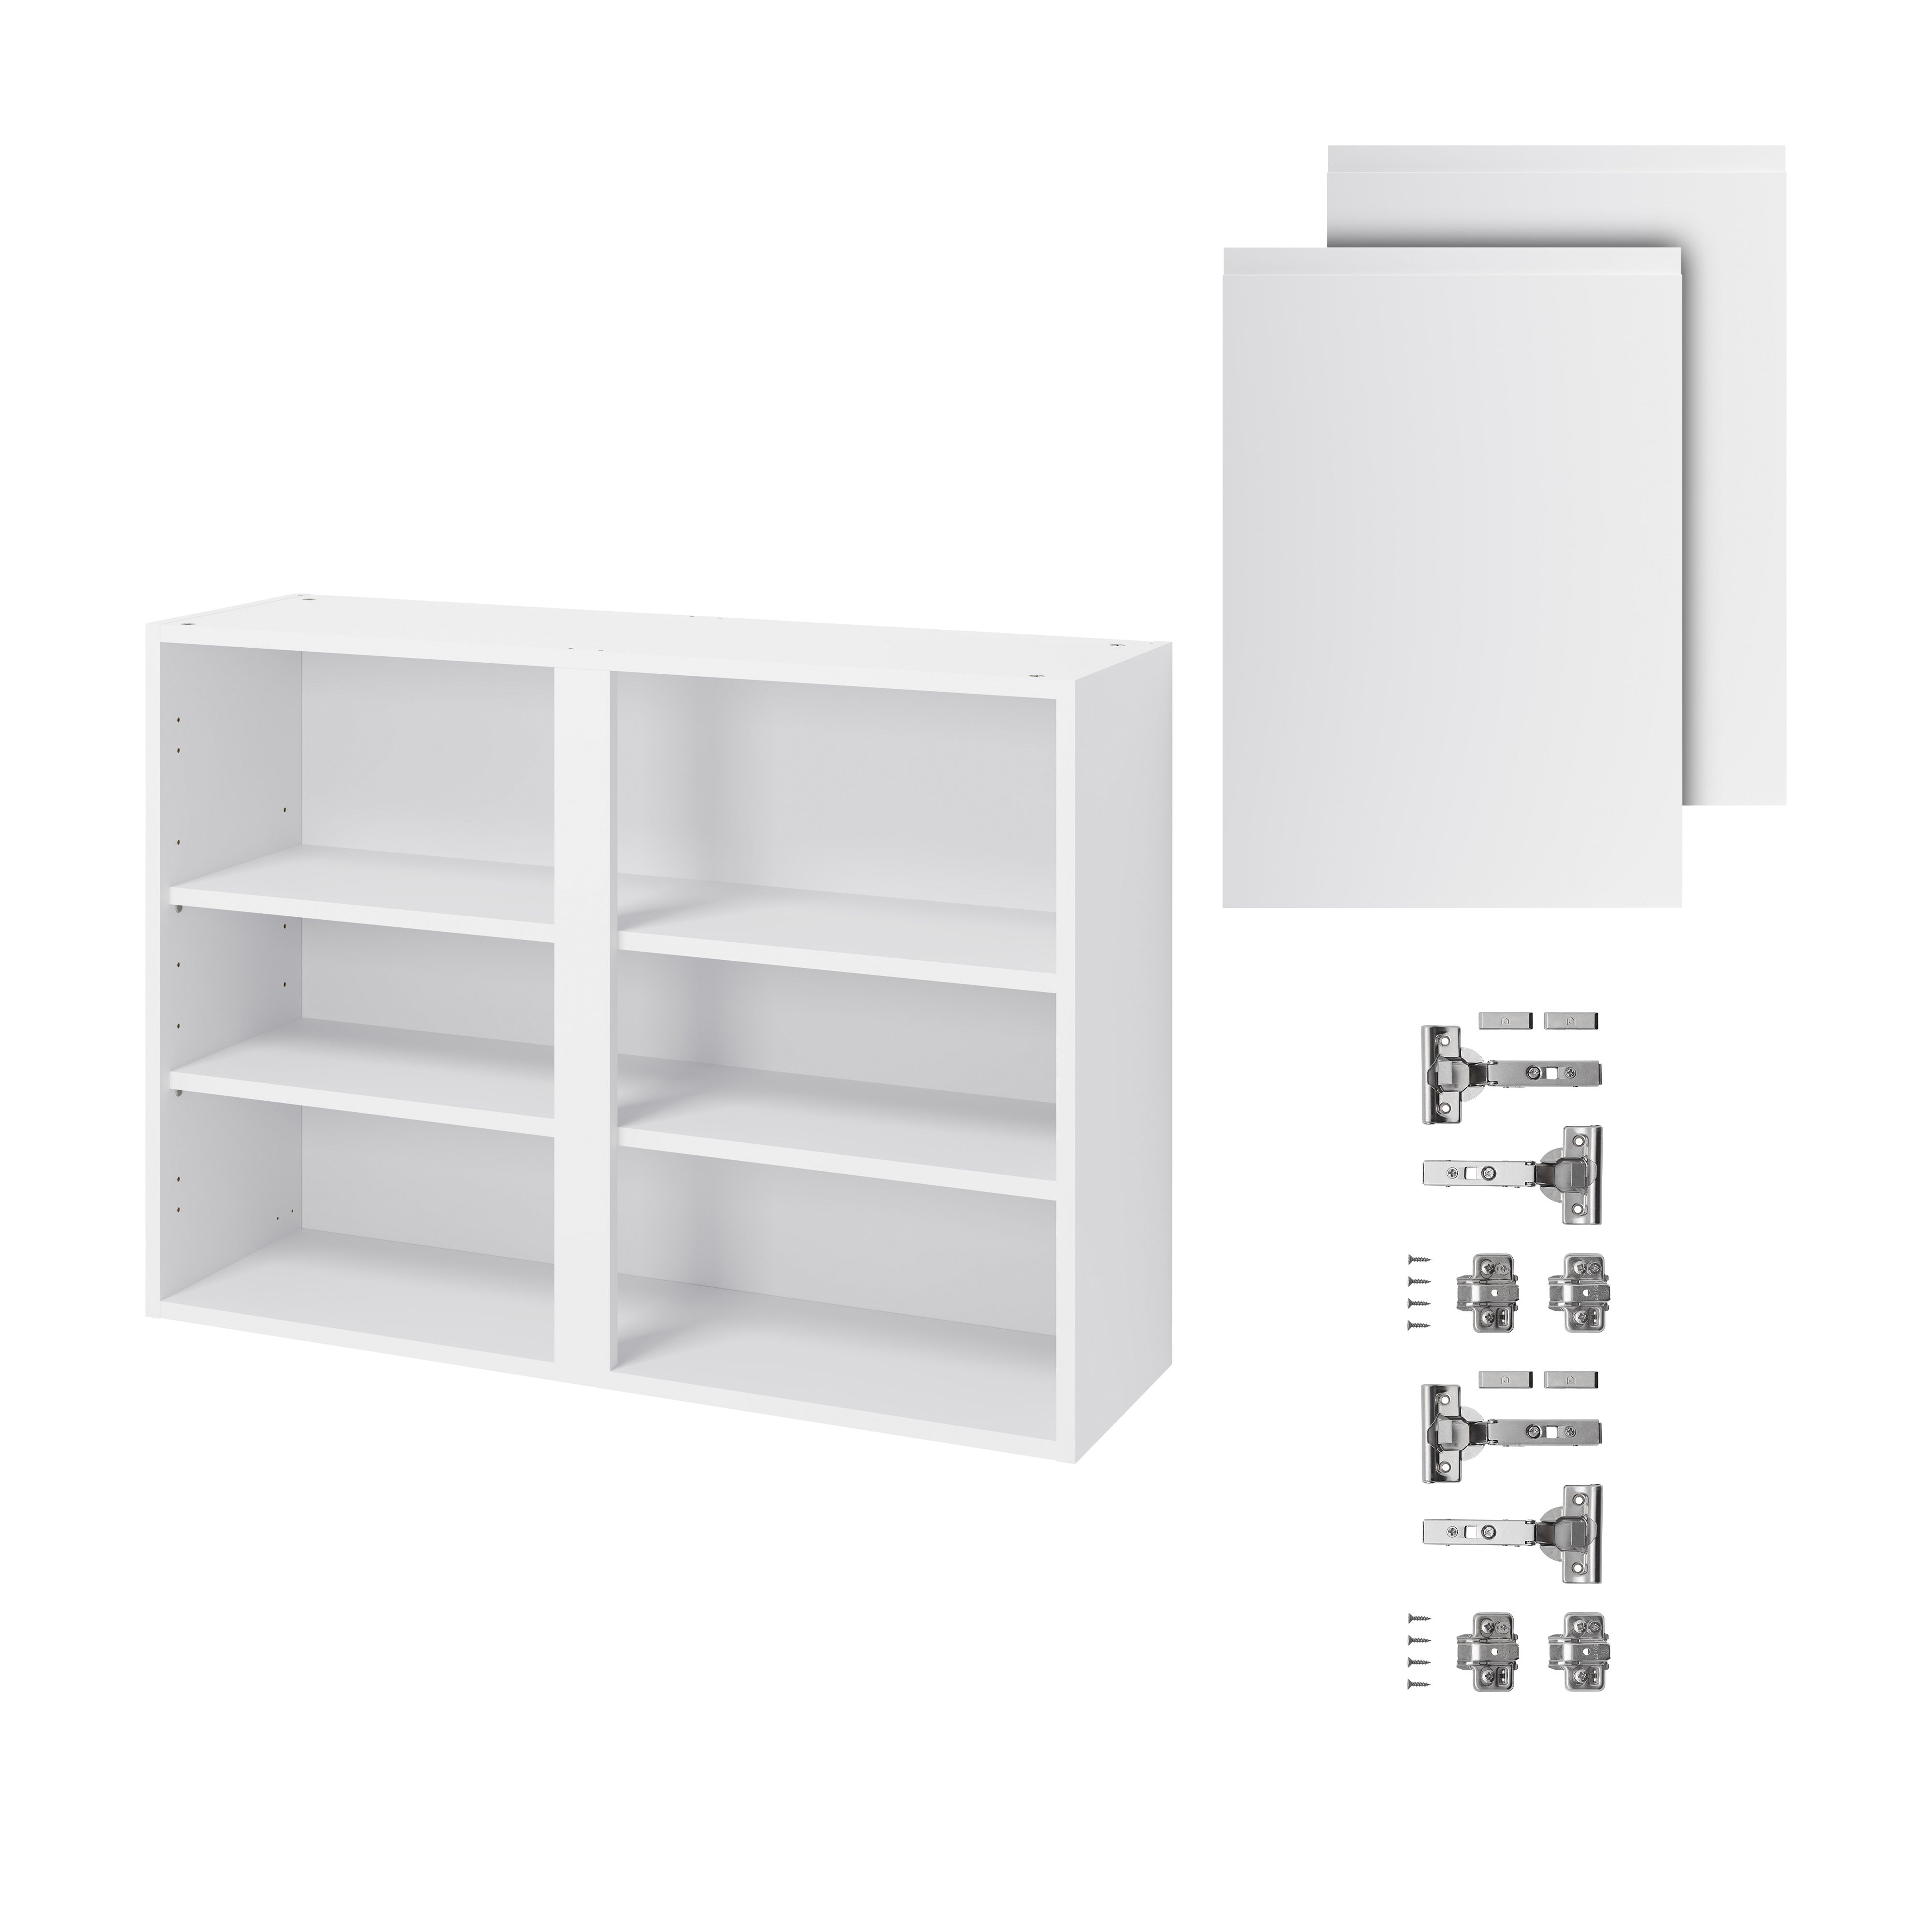 GoodHome Garcinia Gloss light grey integrated handle Wall Kitchen cabinet (W)1000mm (H)720mm